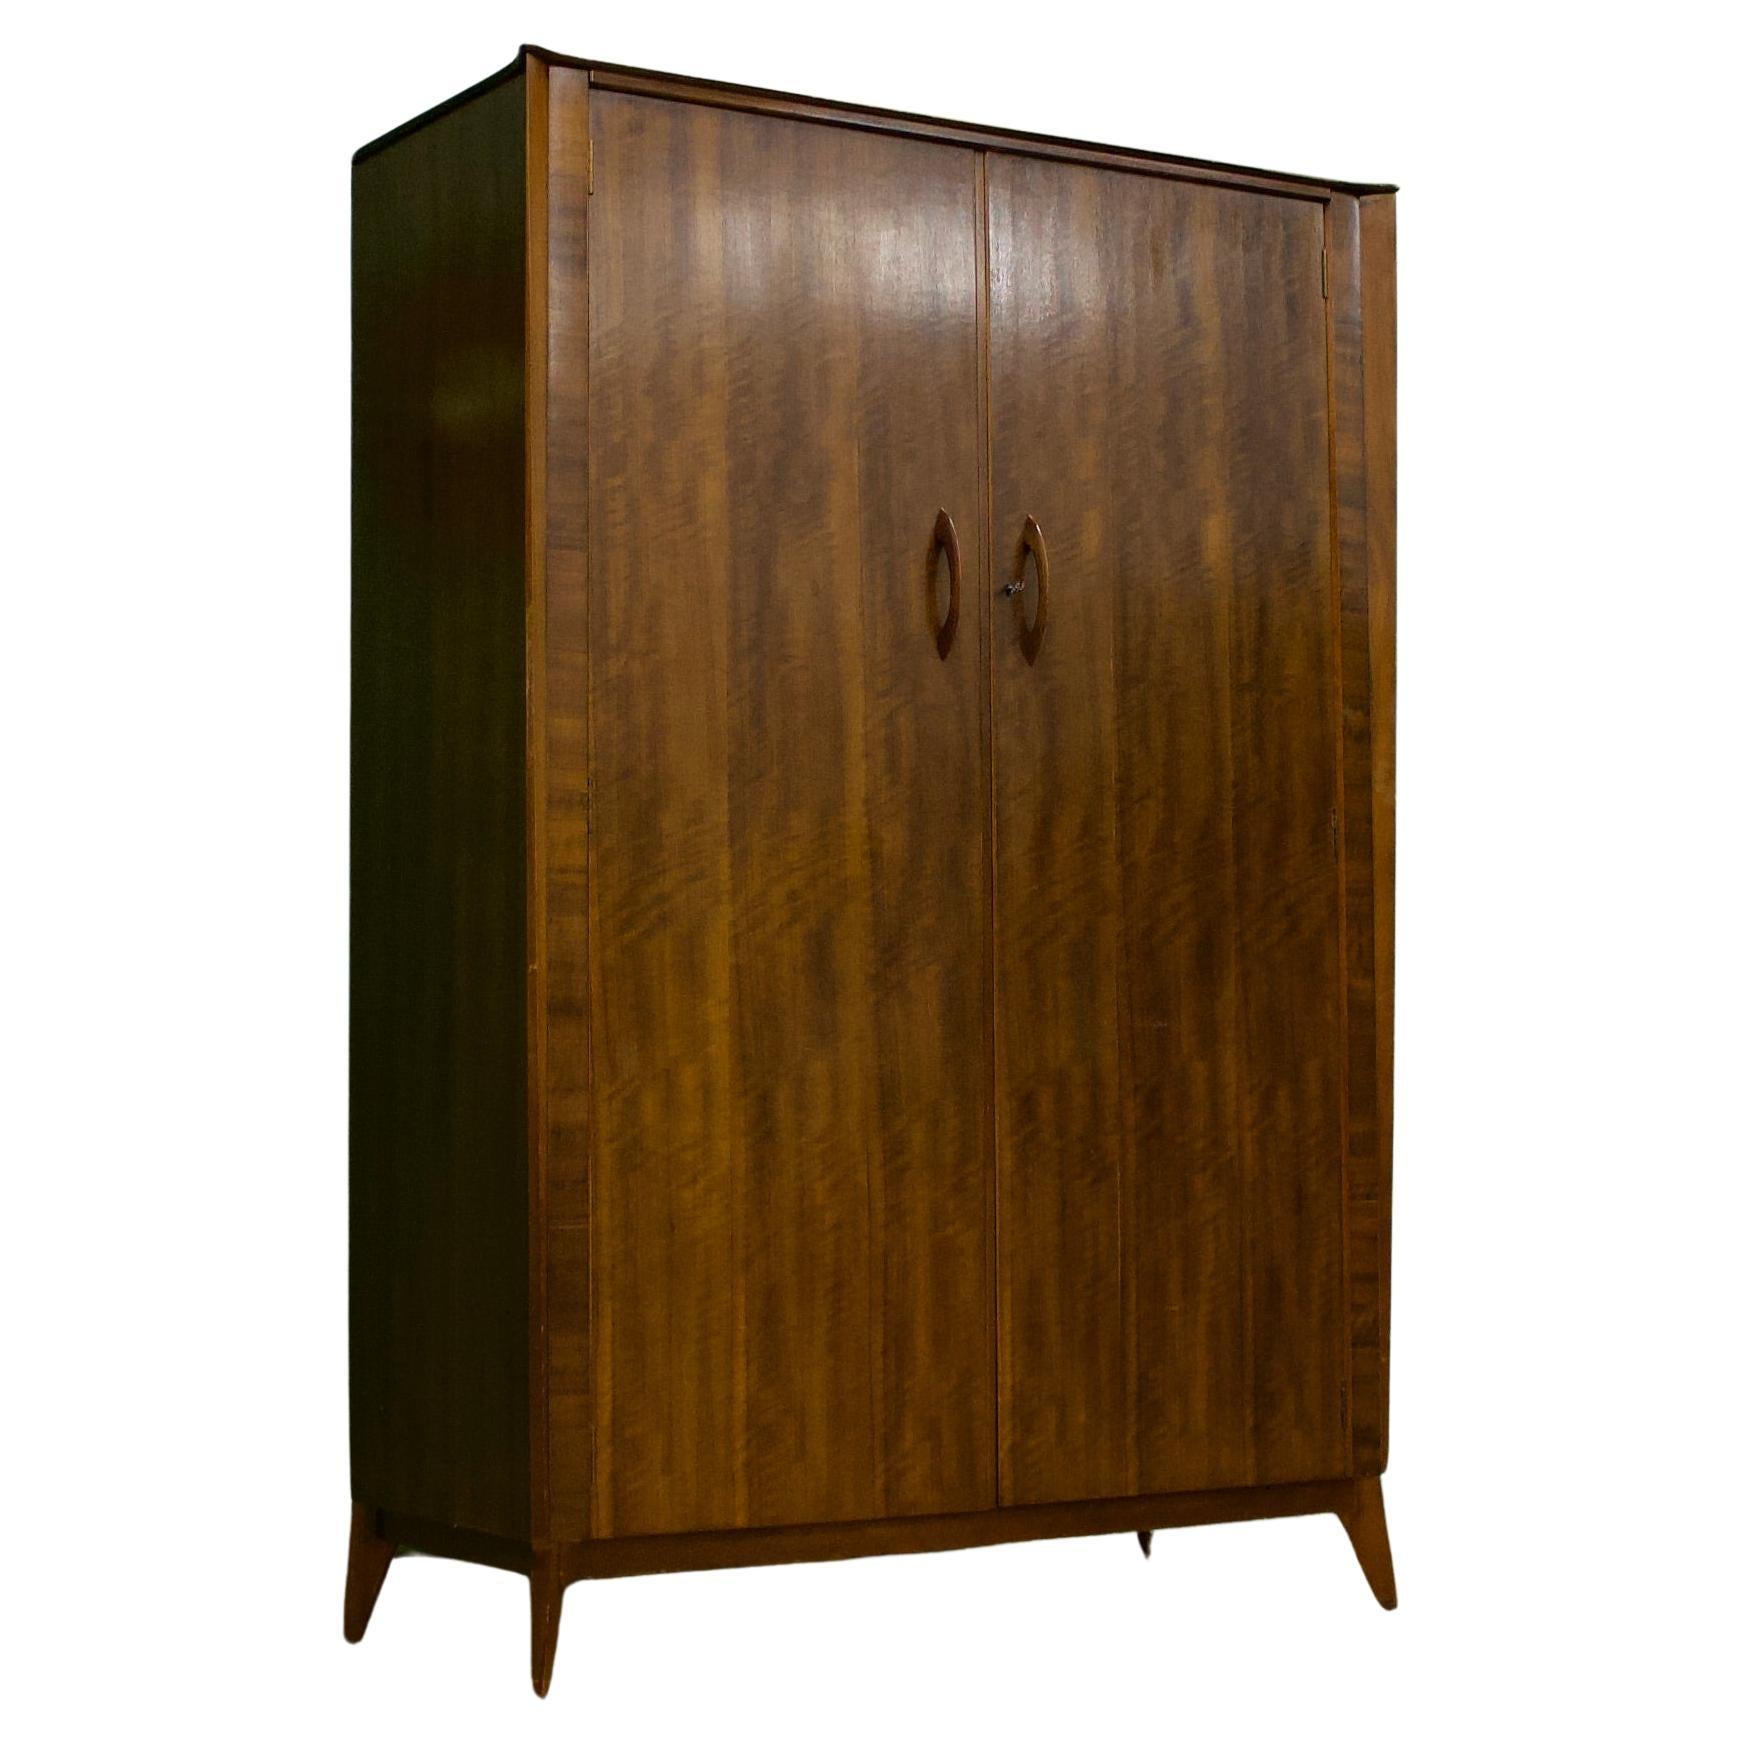 Midcentury Vintage Walnut Wardrobe from Waring and Gillow, 1960s For Sale